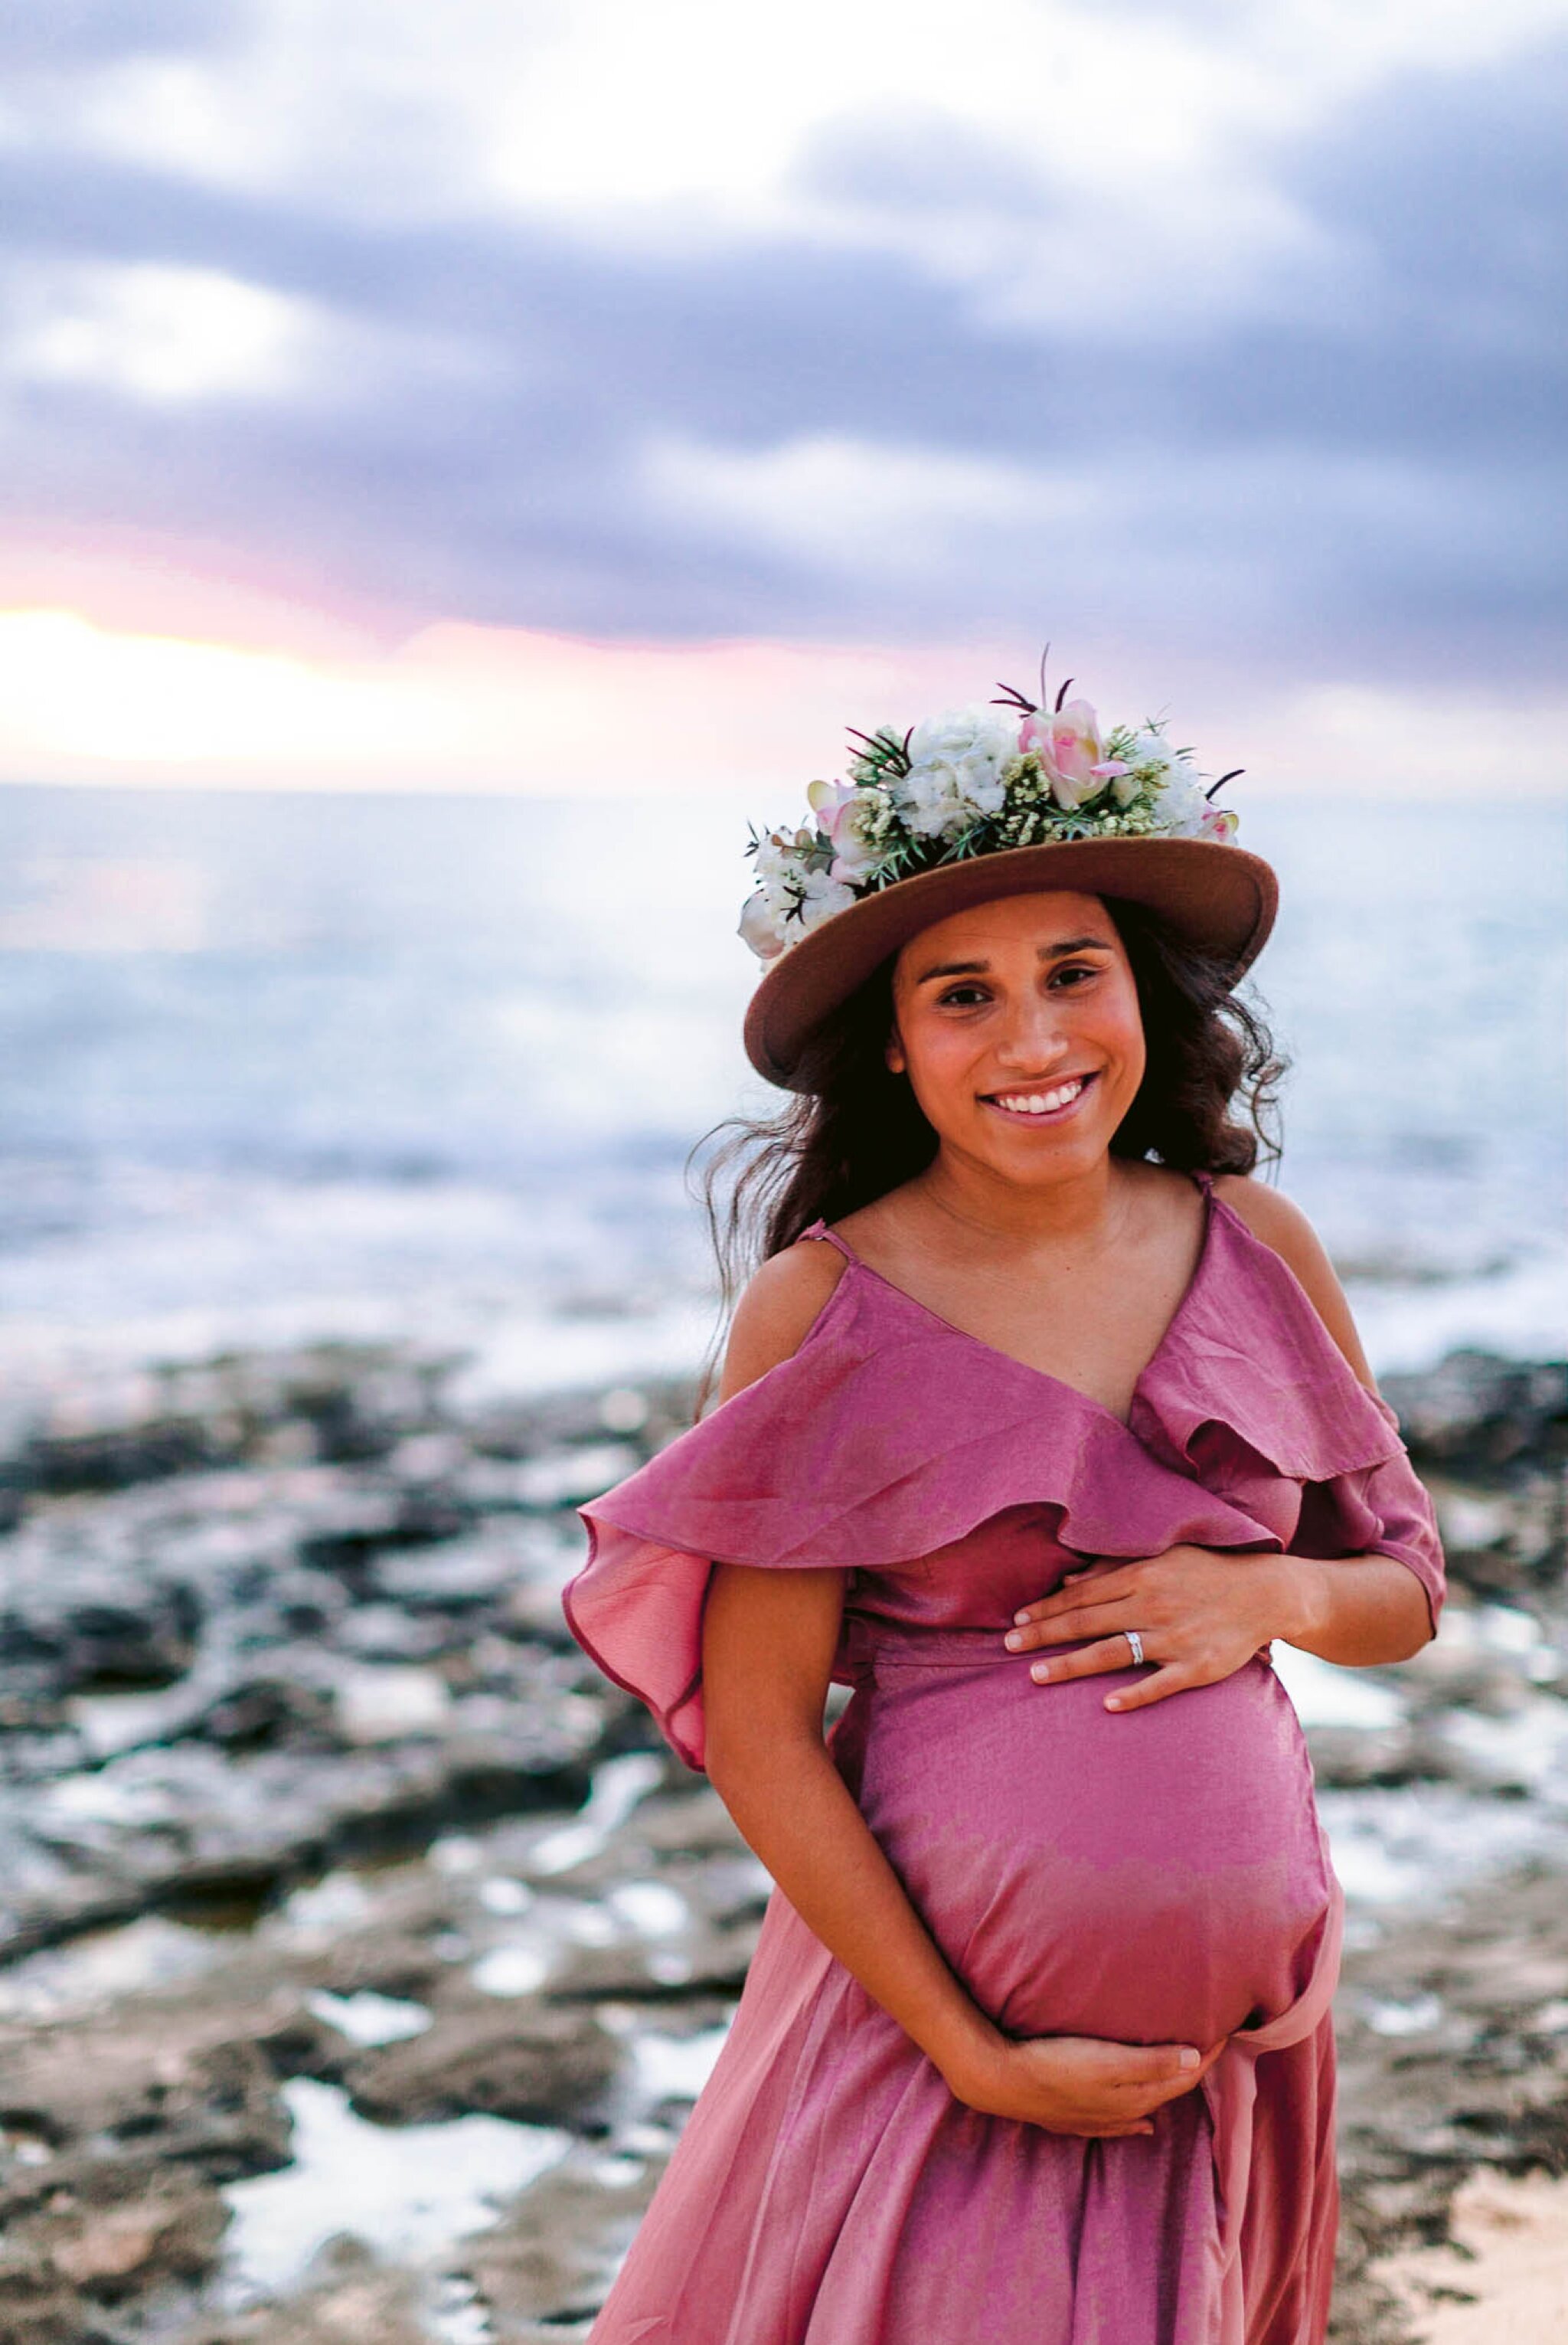 Ruth - Maternity Photography Session at Maili Beach Park, West side oahu - hawaii family photographer 23.jpg